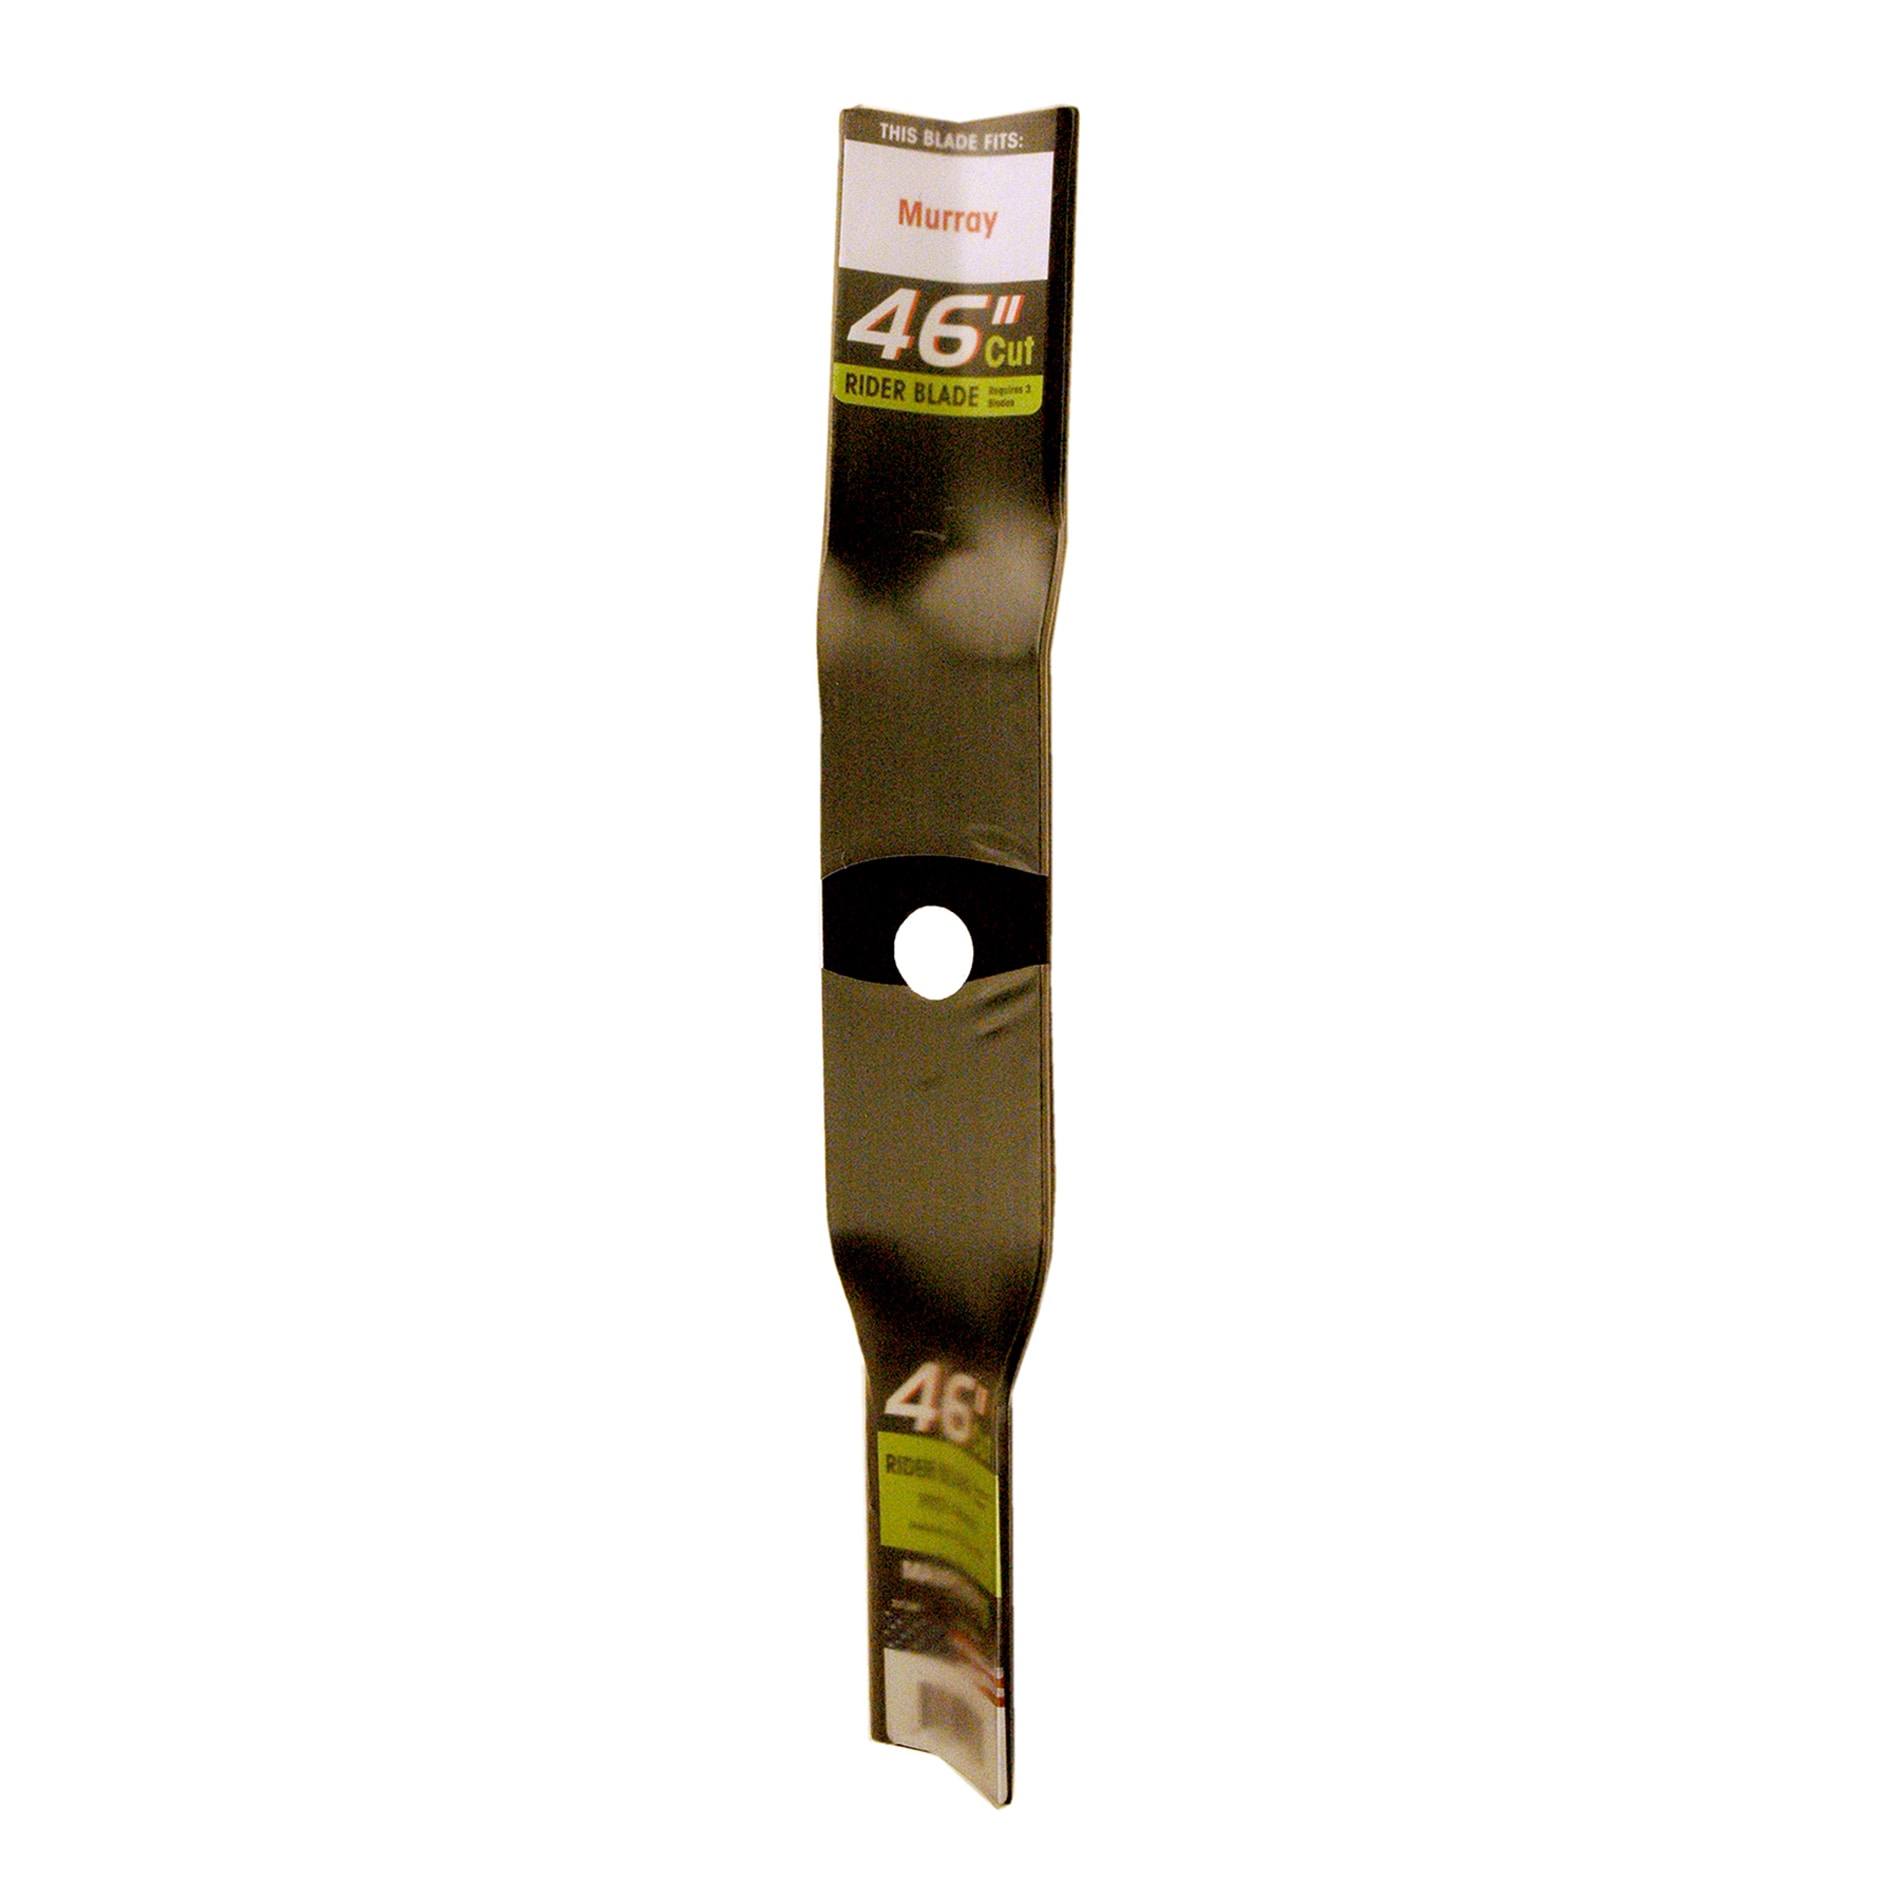 MaxPower 46-in Deck Standard Mower Blade for Riding Mower/Tractors